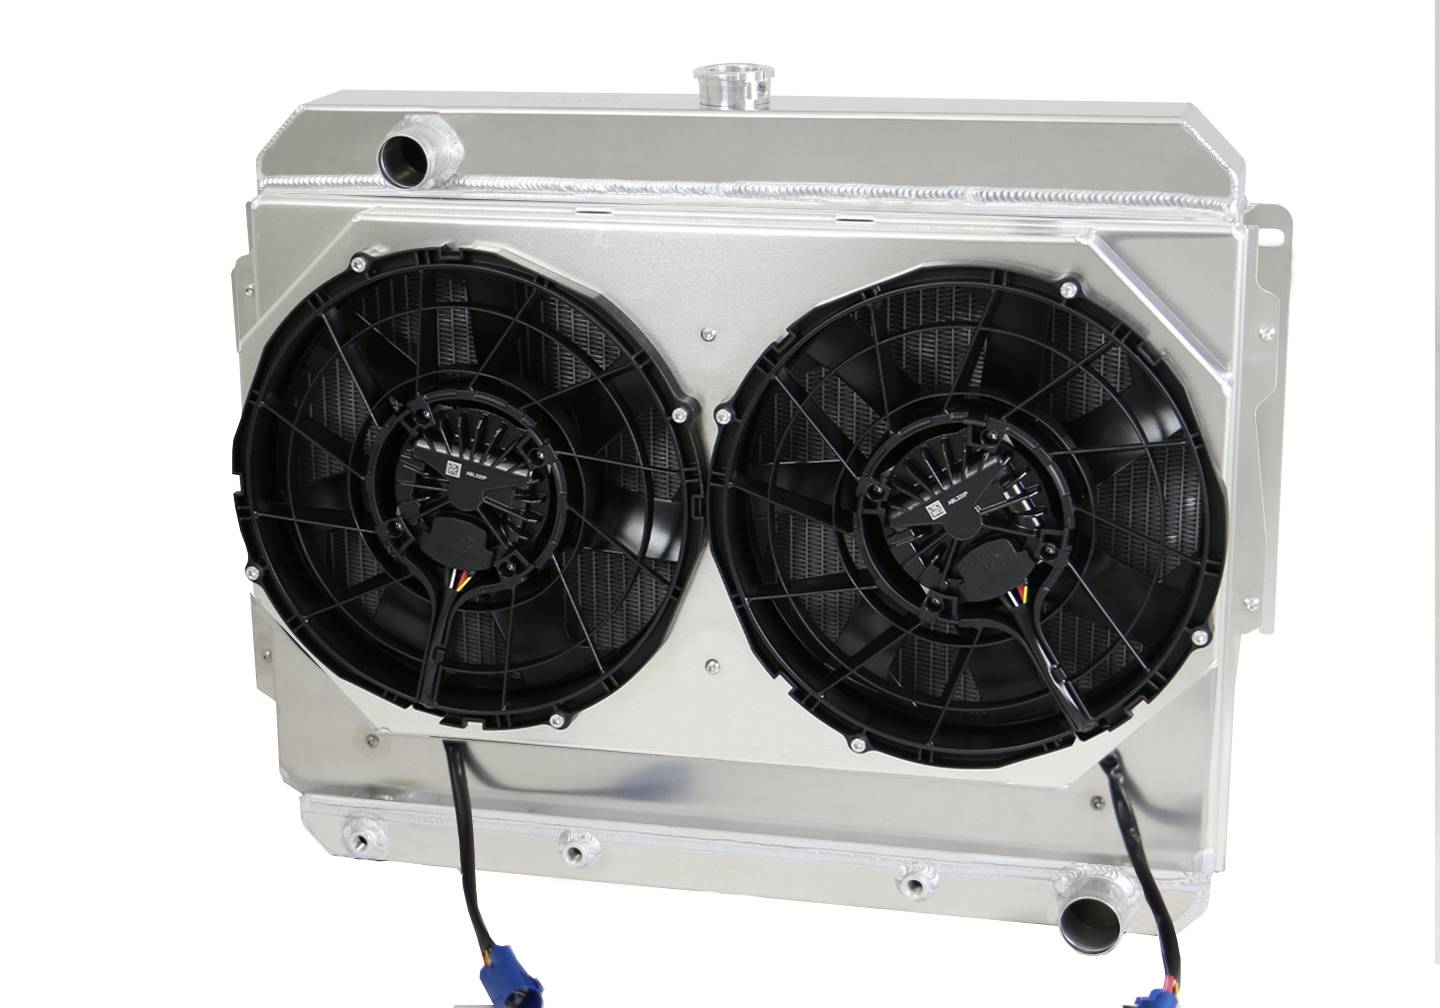 Wizard Cooling Inc - Wizard Cooling - 1966-1969 26", Small Block, Mopar Applications Aluminum Radiator w/ Brushless Fans - 1638-212BL